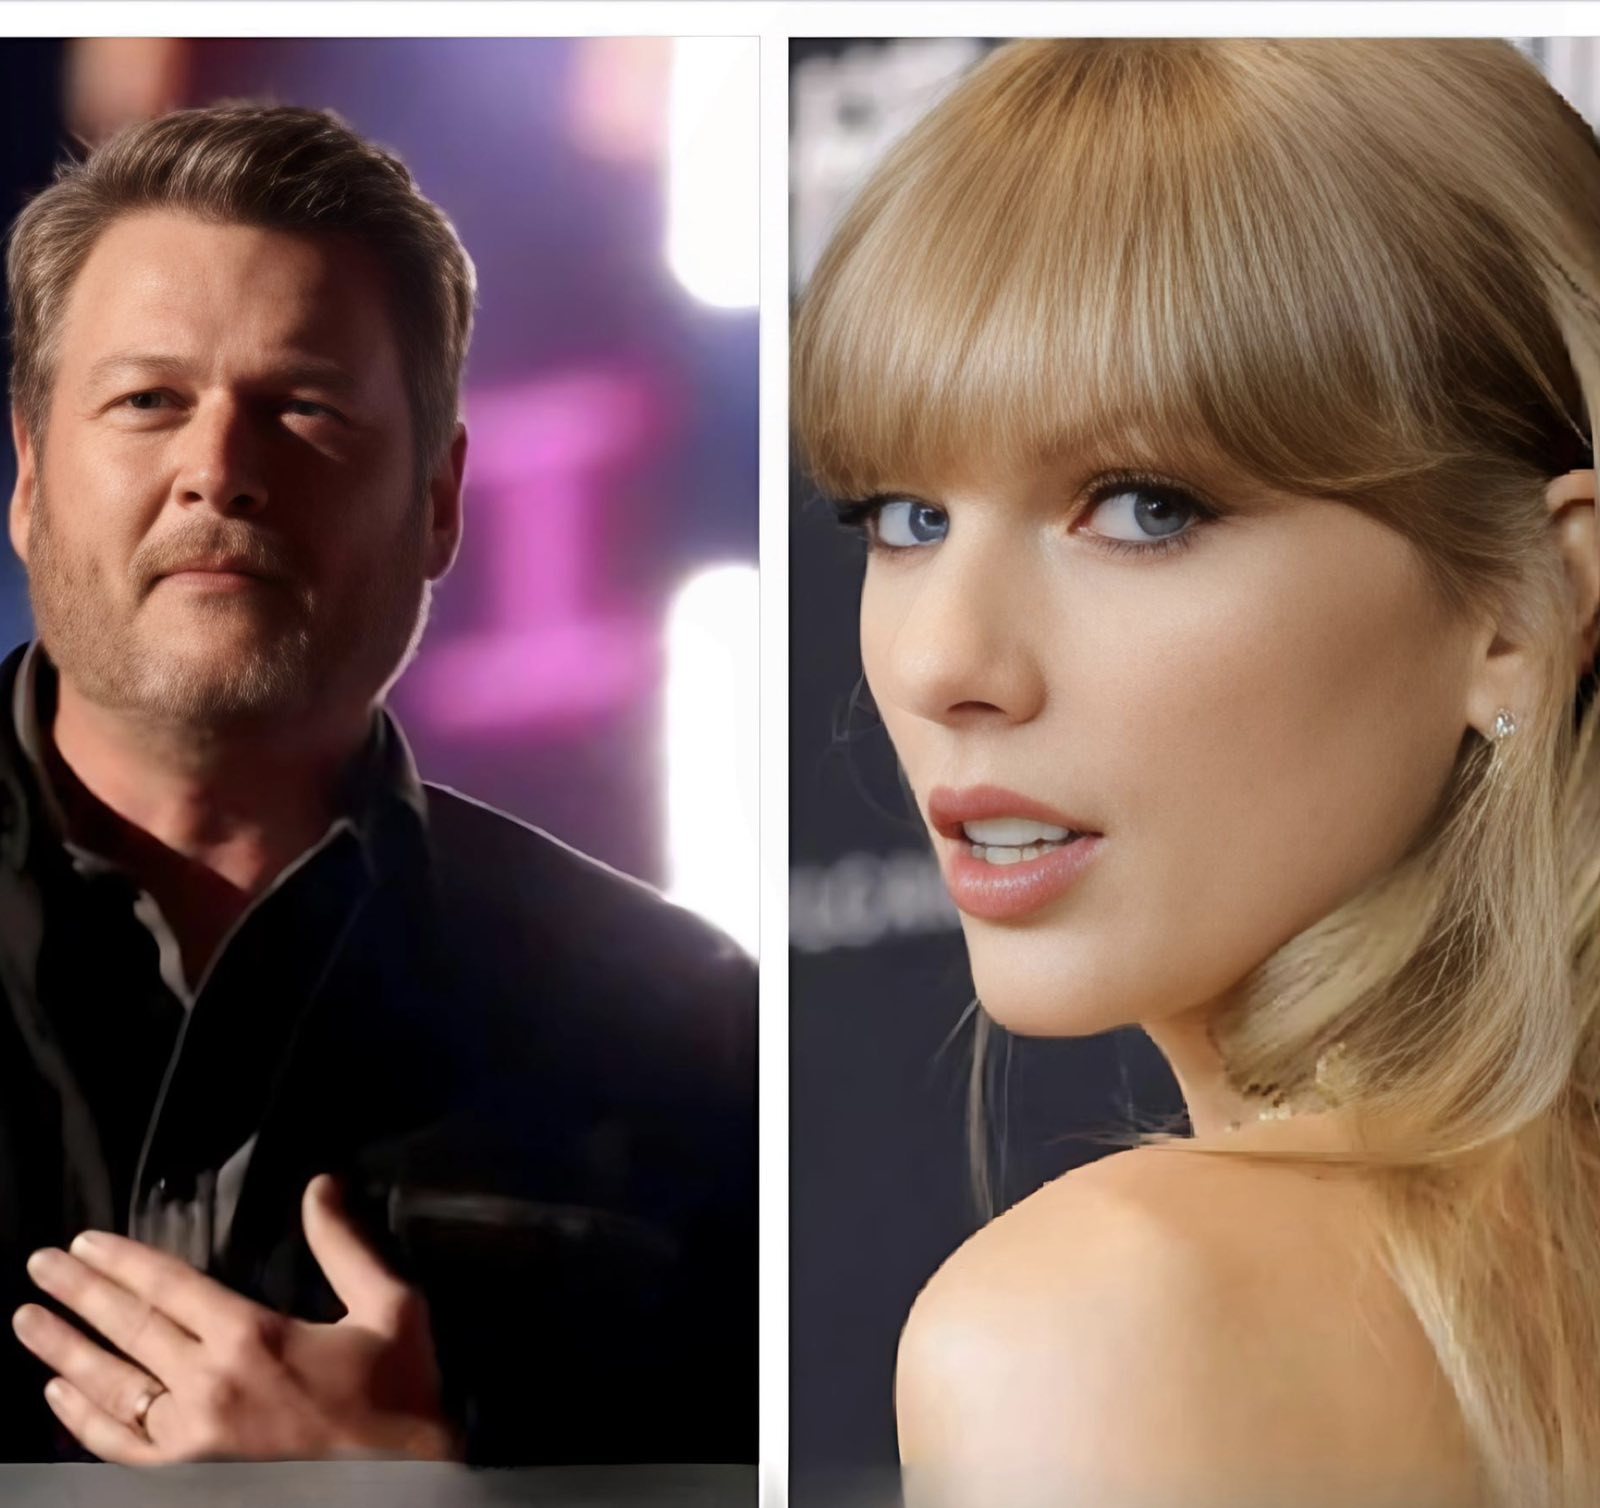 “This isn’t your moment, Taylor,” Blake Shelton remarks to Taylor Swift when she offers to “assist” with his Toby Keith tribute.